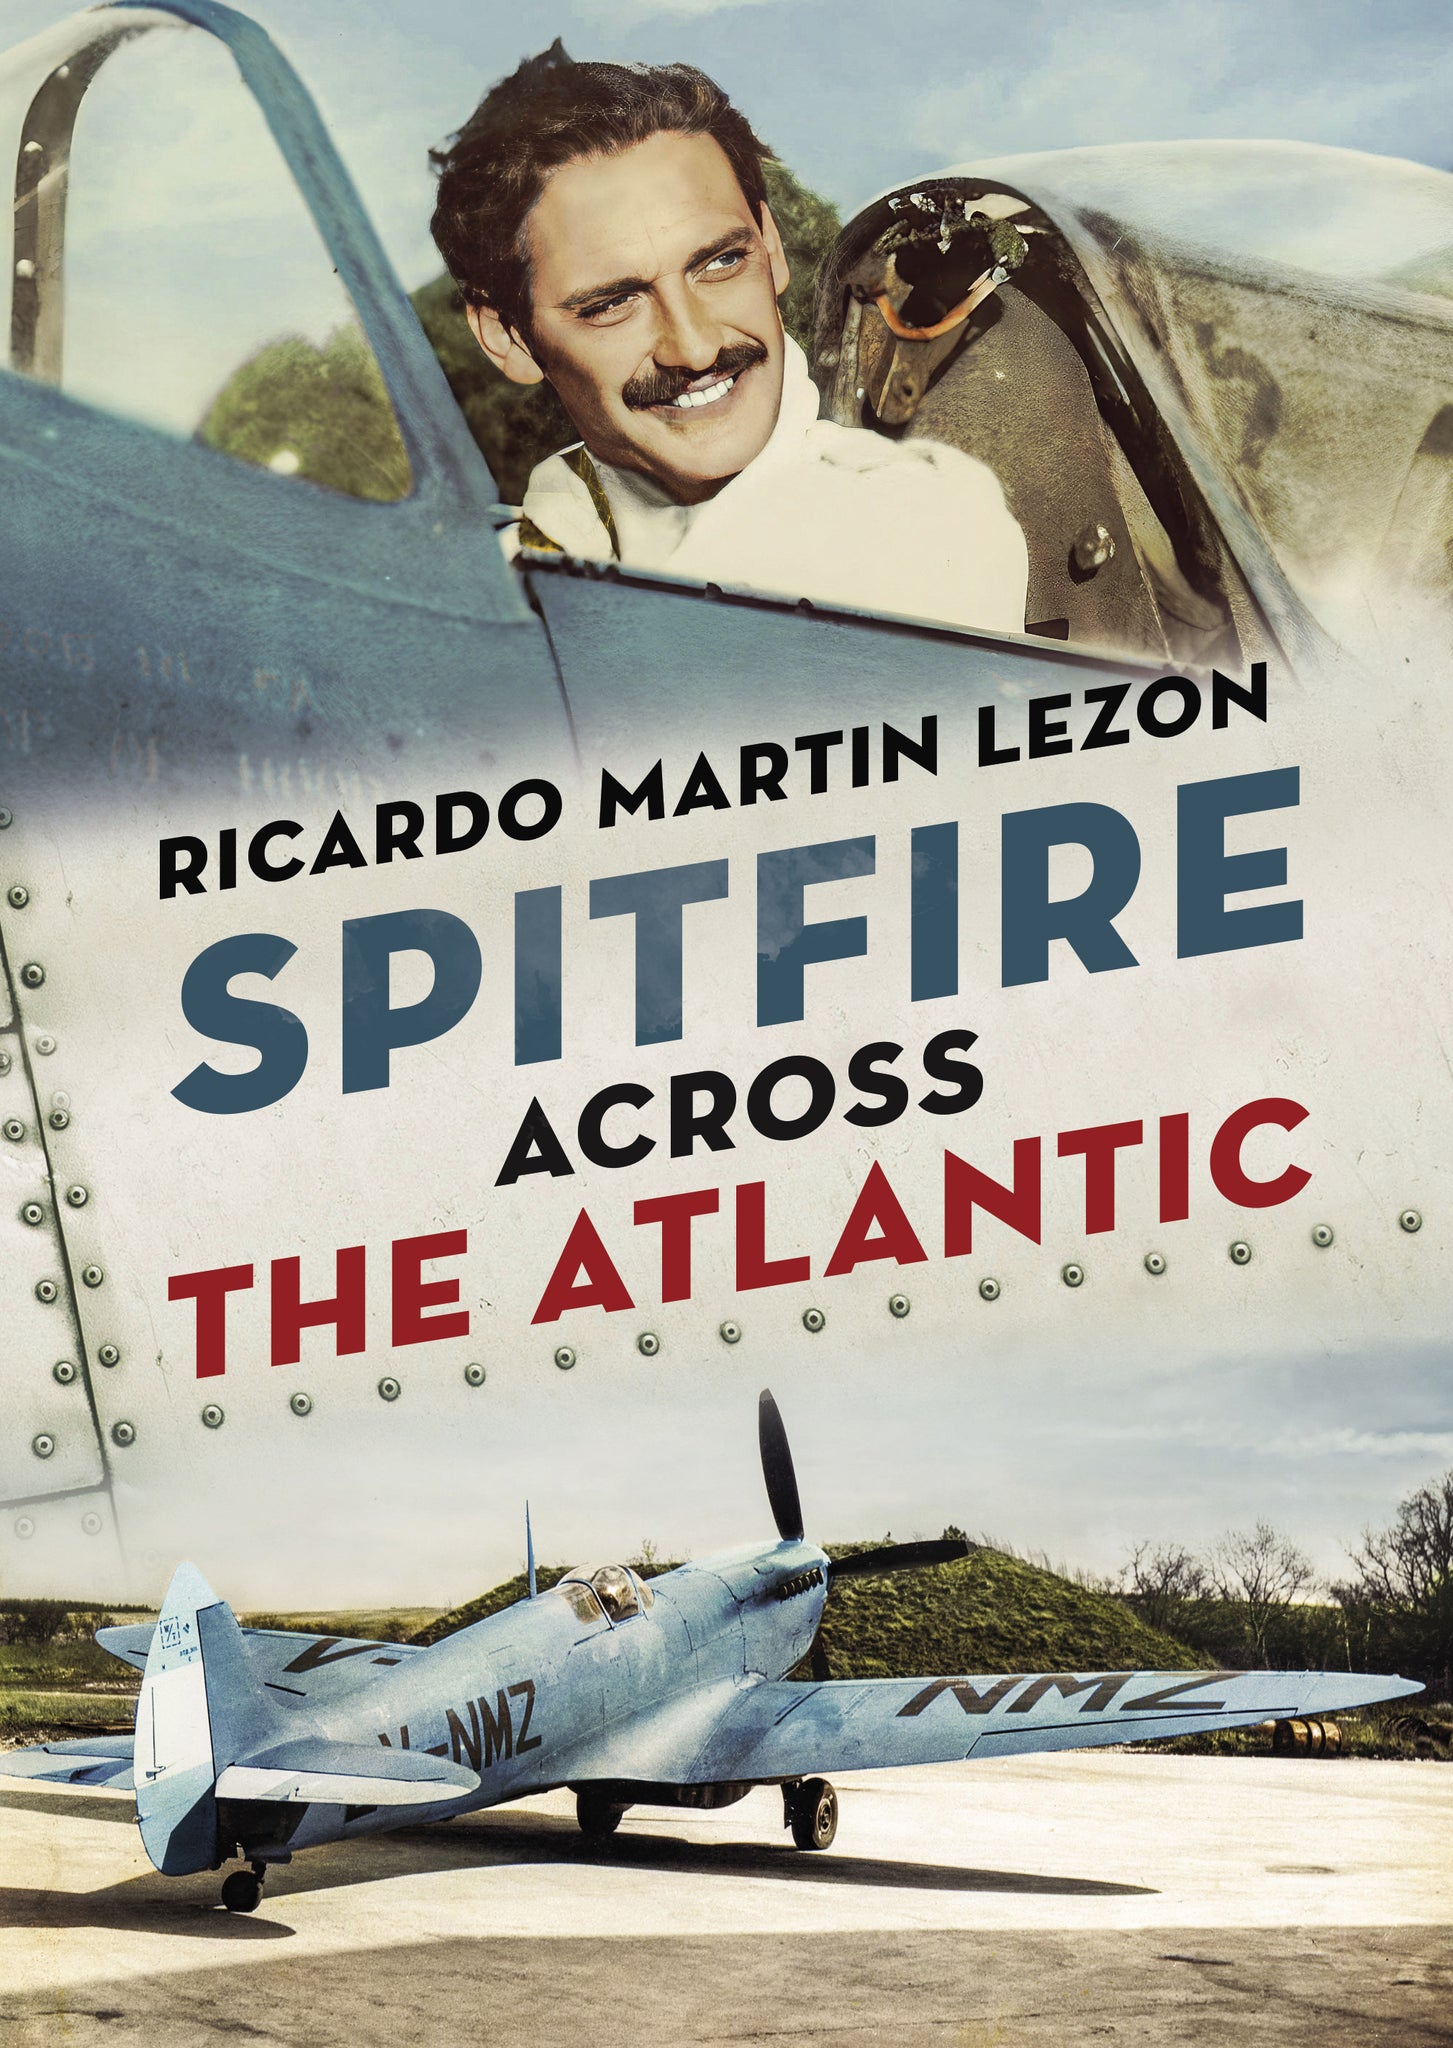 "Spitfire Across the Atlantic" by Ricardo Martin Lezon is published by Fonthill Media